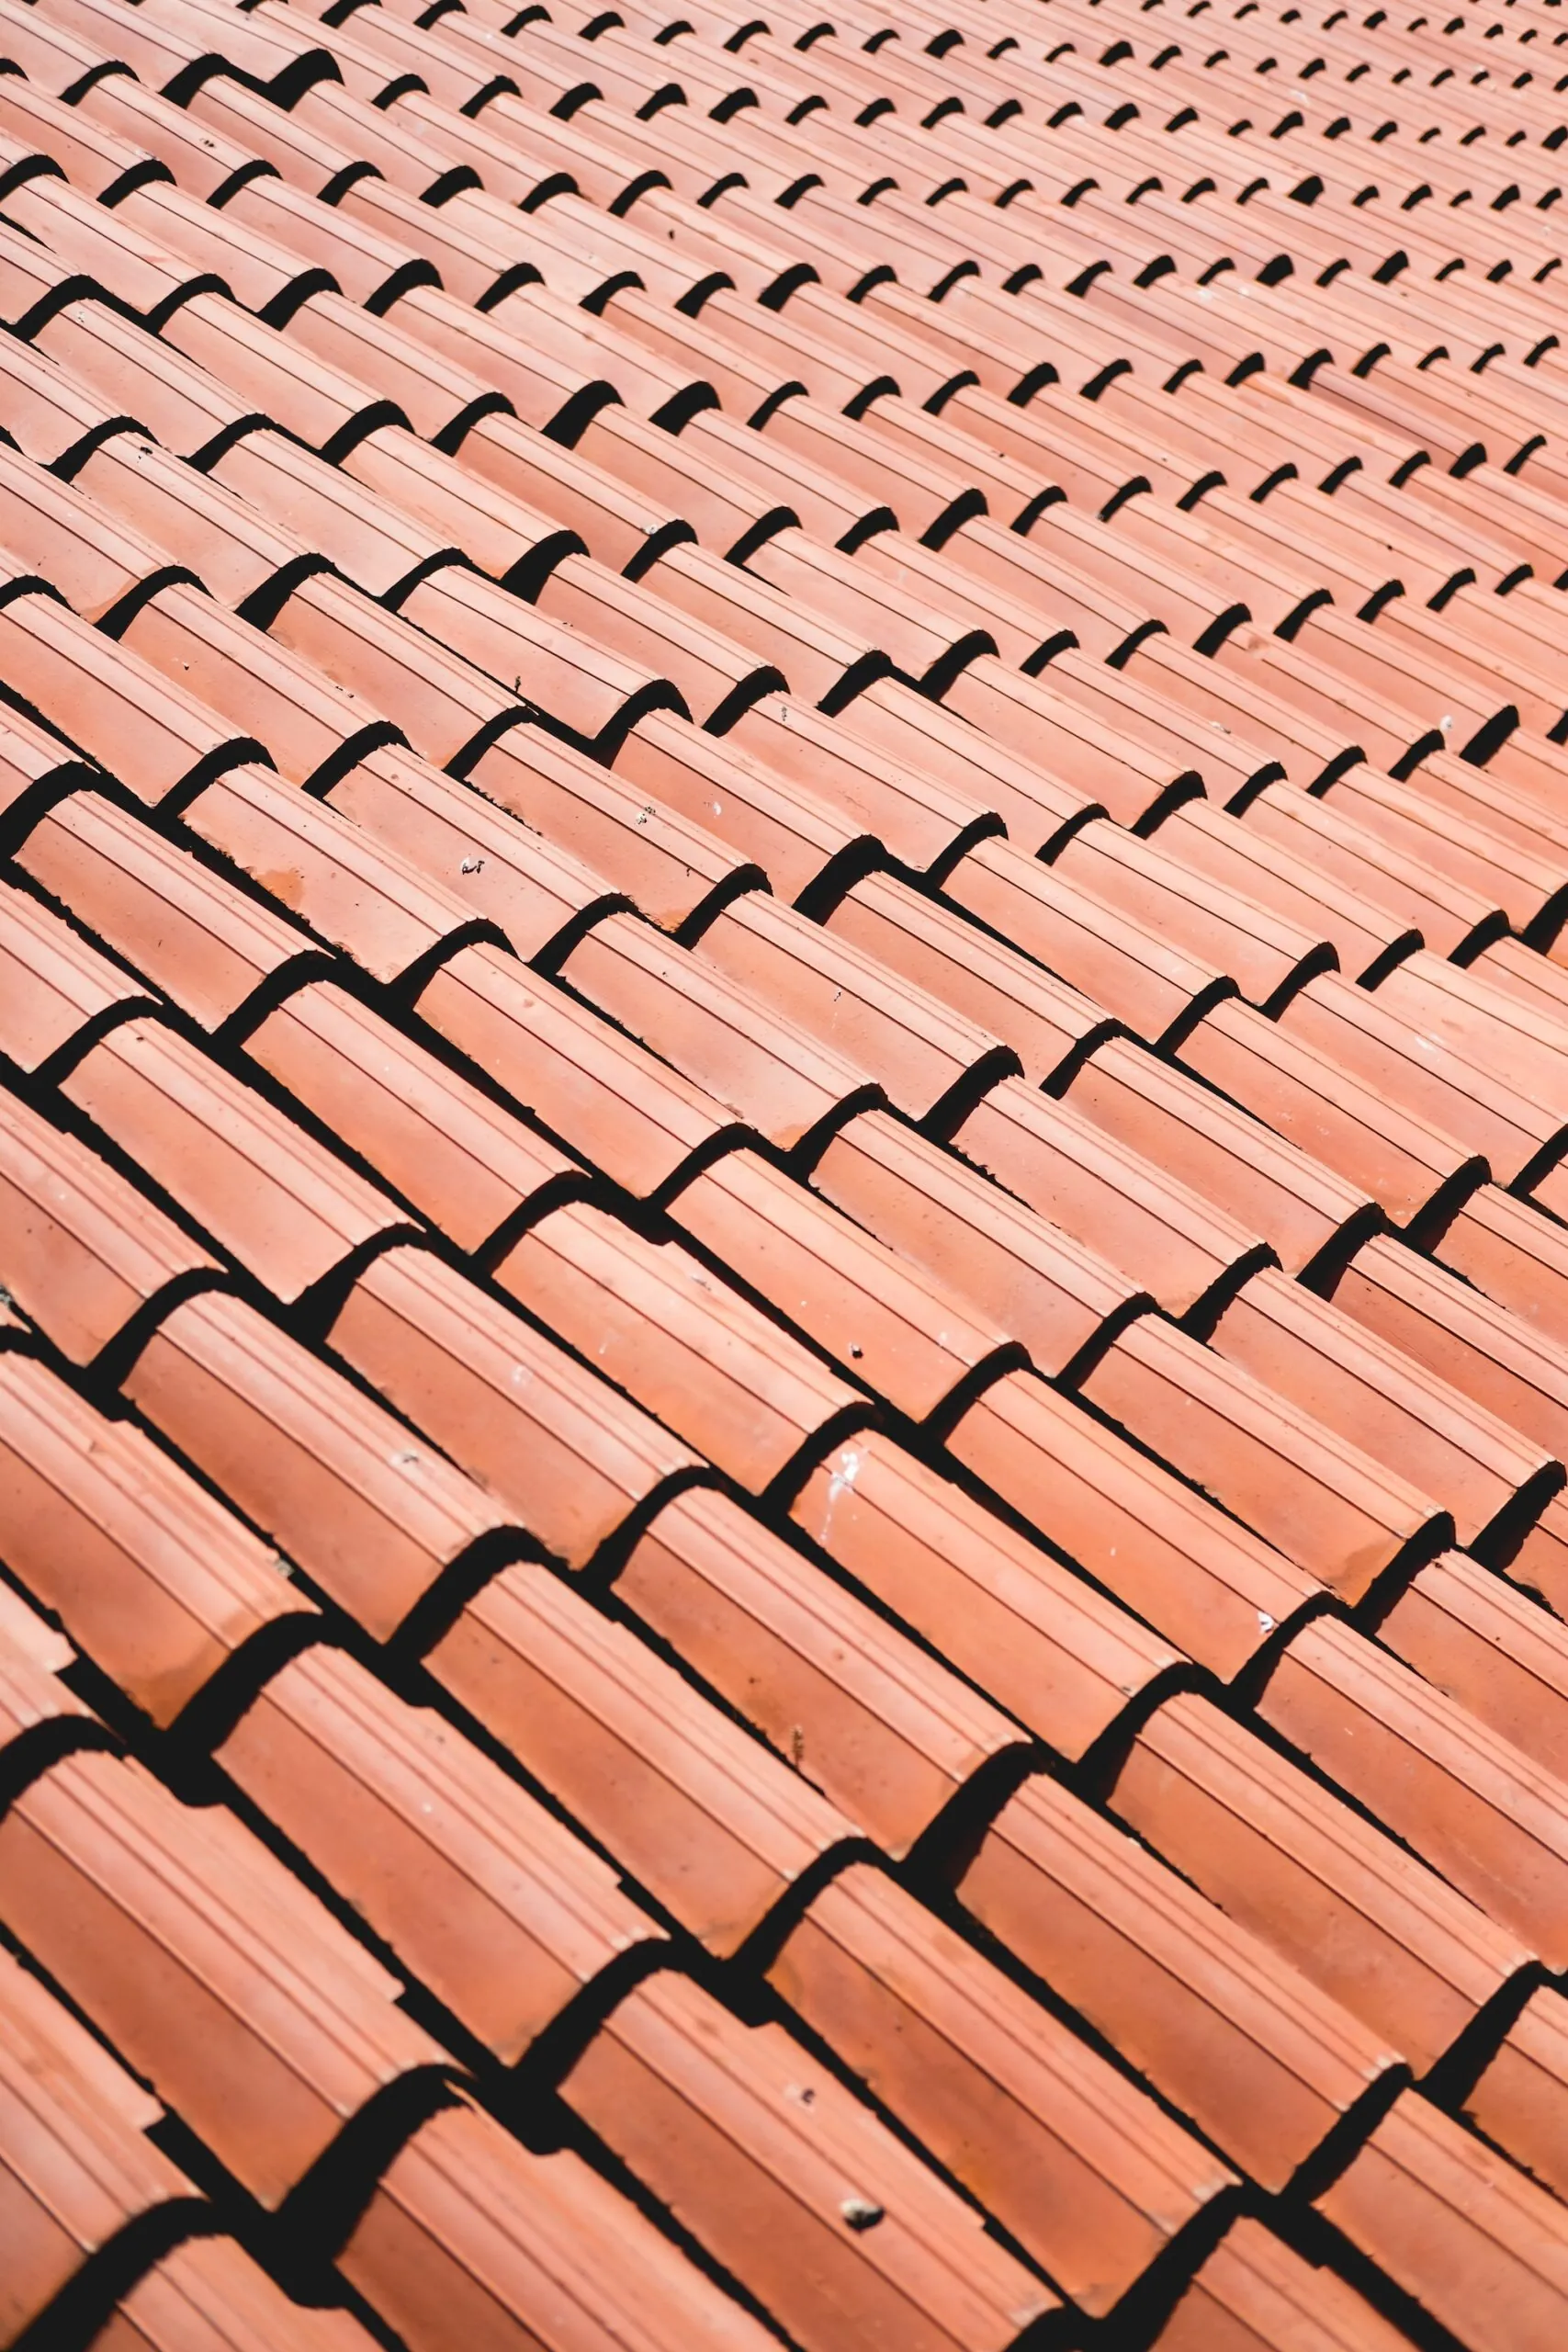 roofing tiles up close